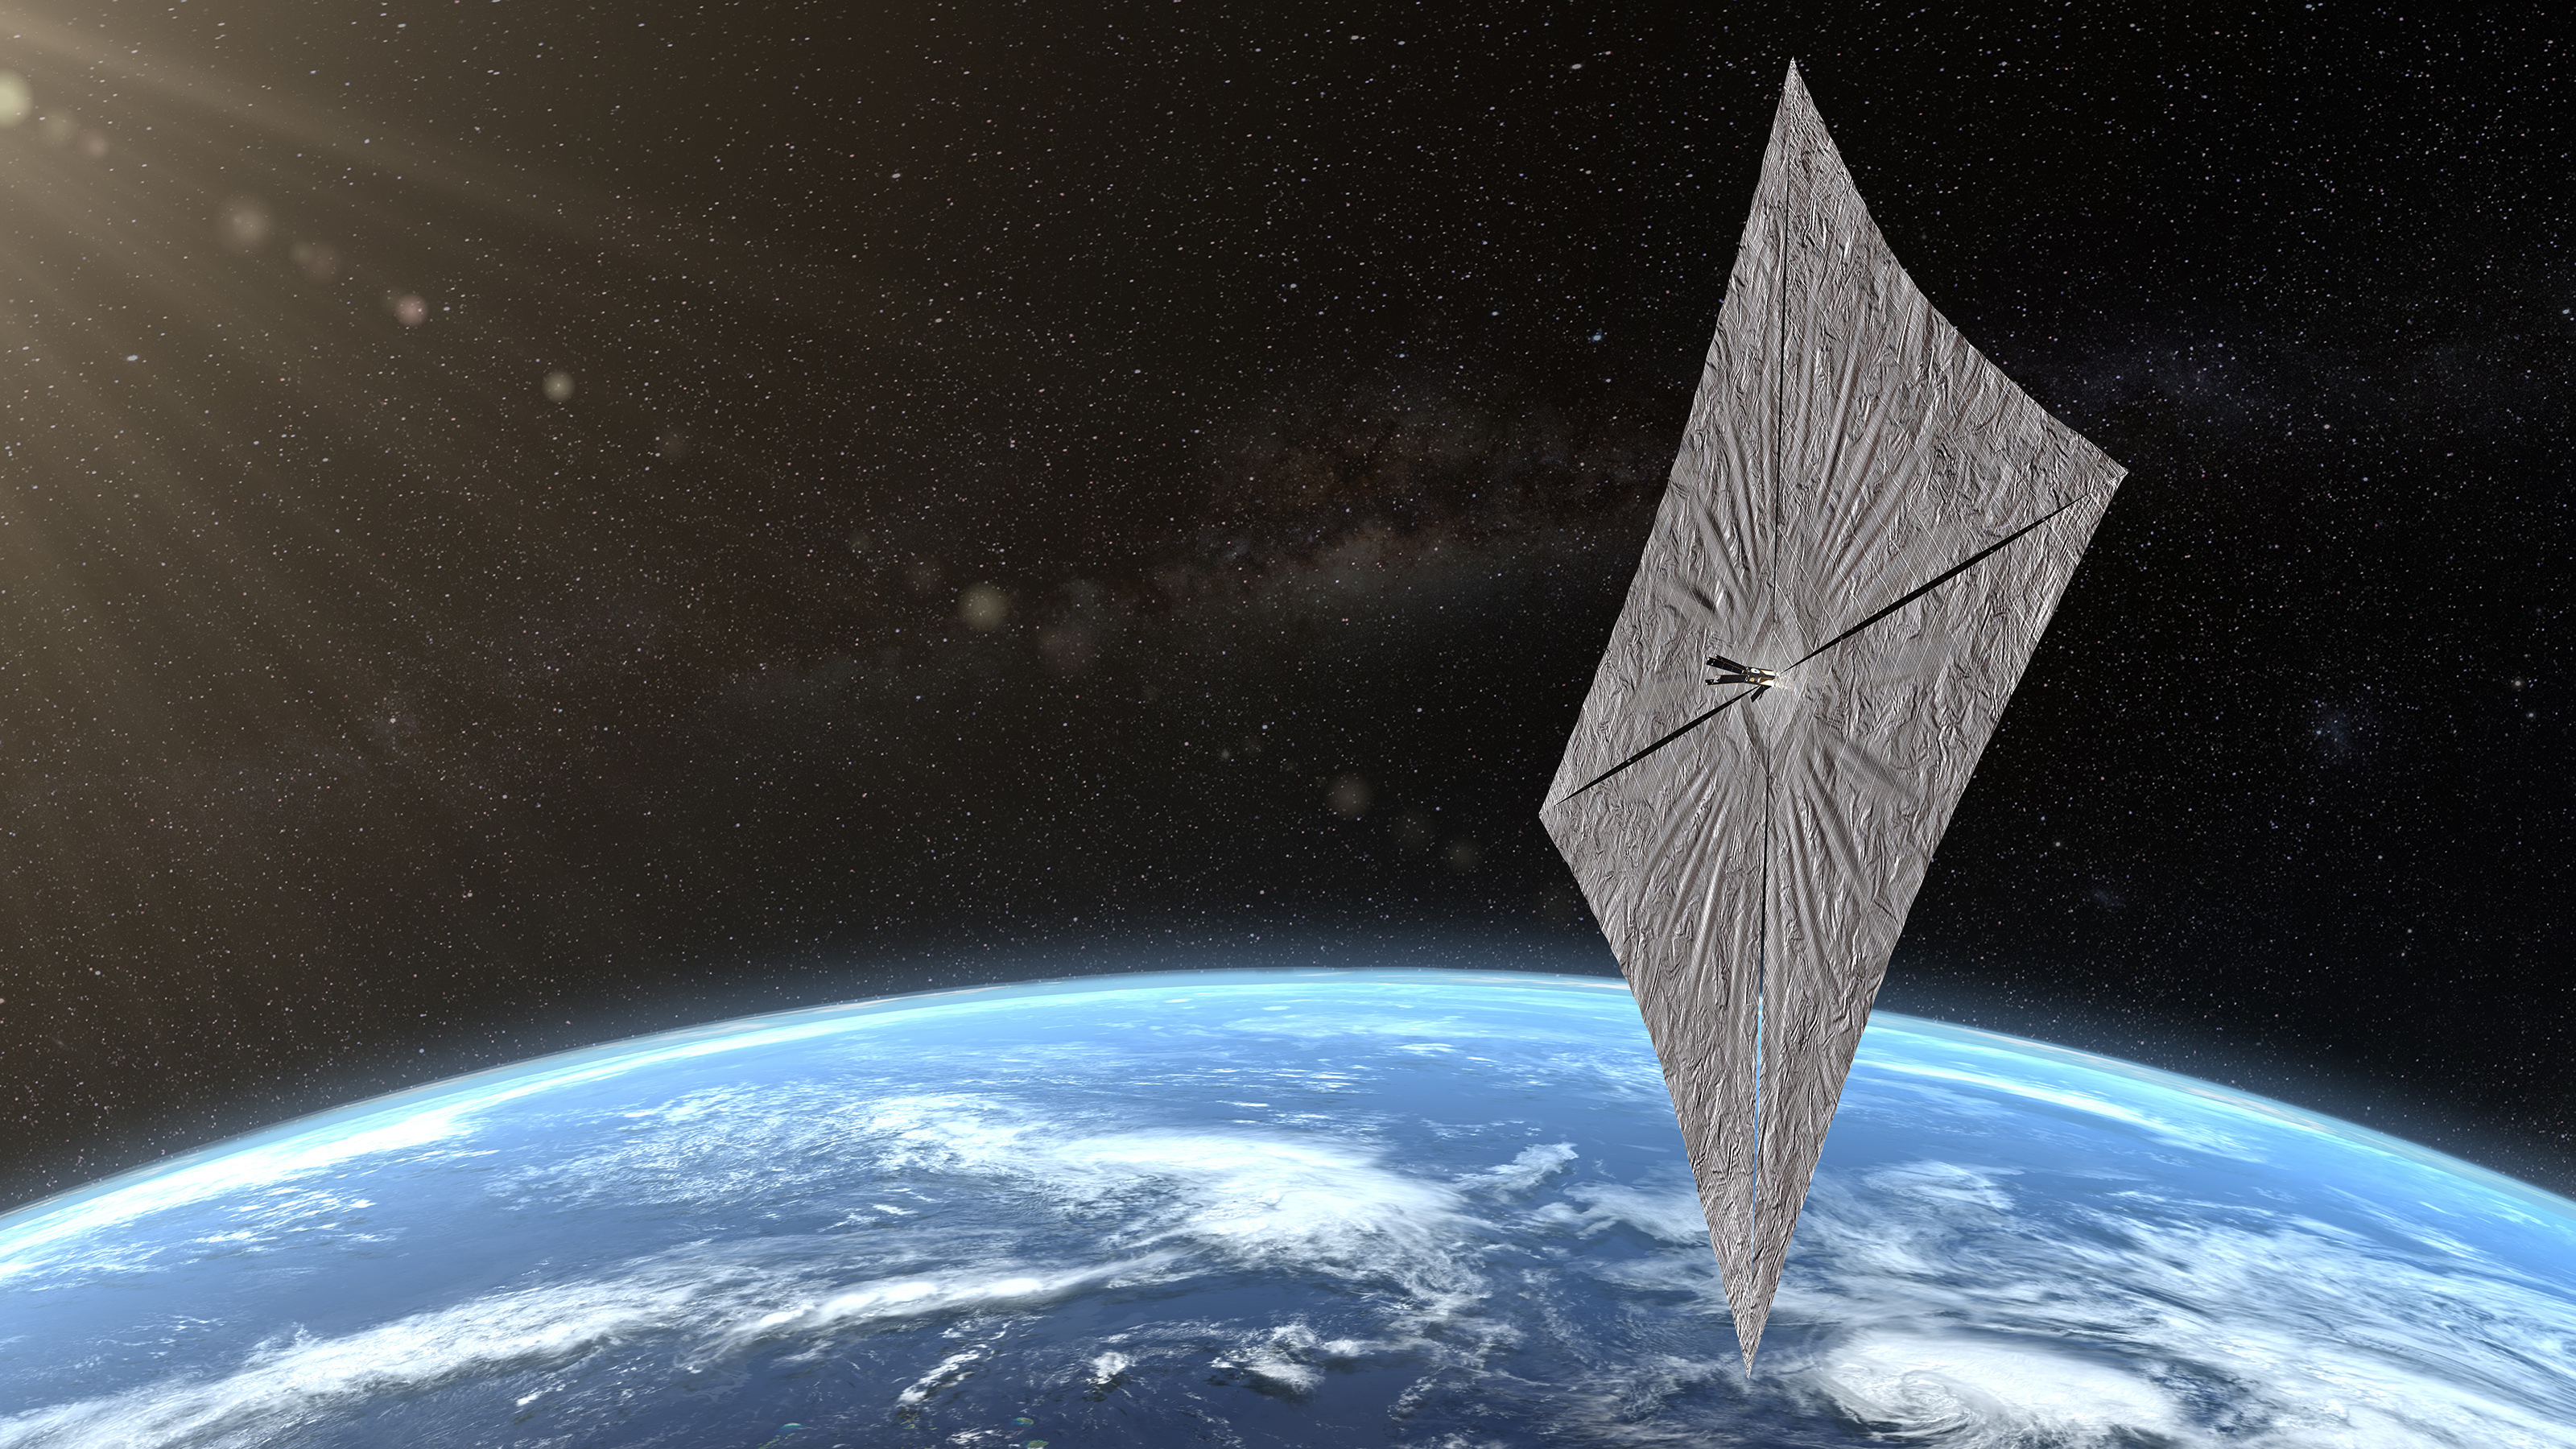 LightSail 2 Sends Back 1st Signals from Its SolarSurfing Test Flight